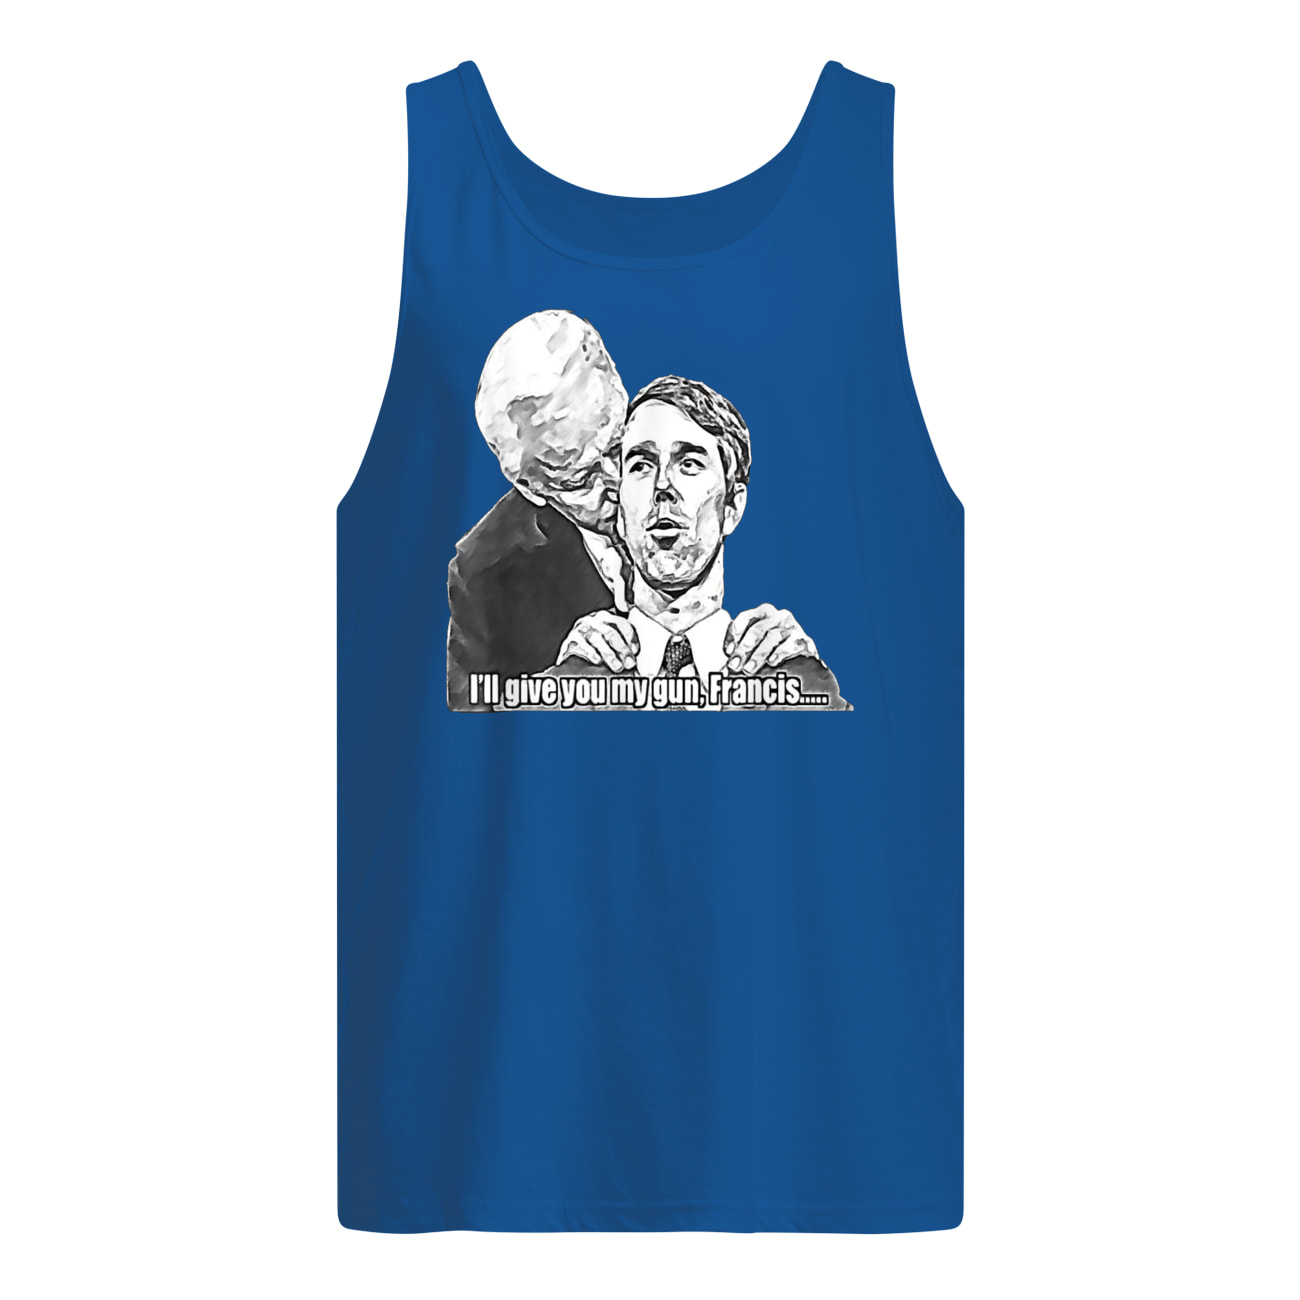 Gimme gimme I'll give you my gun francis tank top